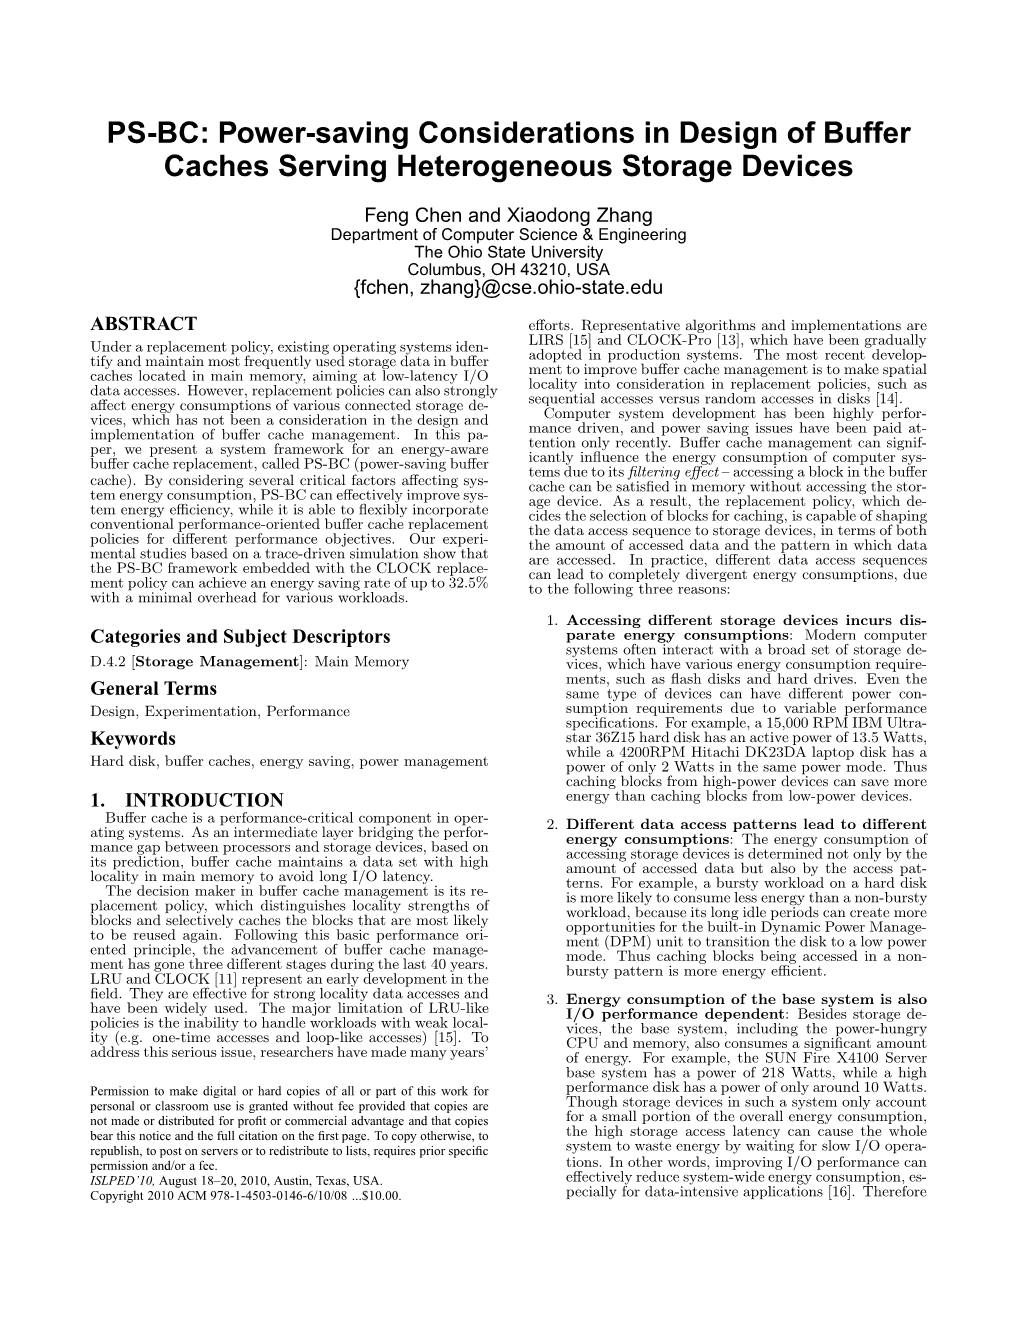 PS-BC: Power-Saving Considerations in Design of Buffer Caches Serving Heterogeneous Storage Devices